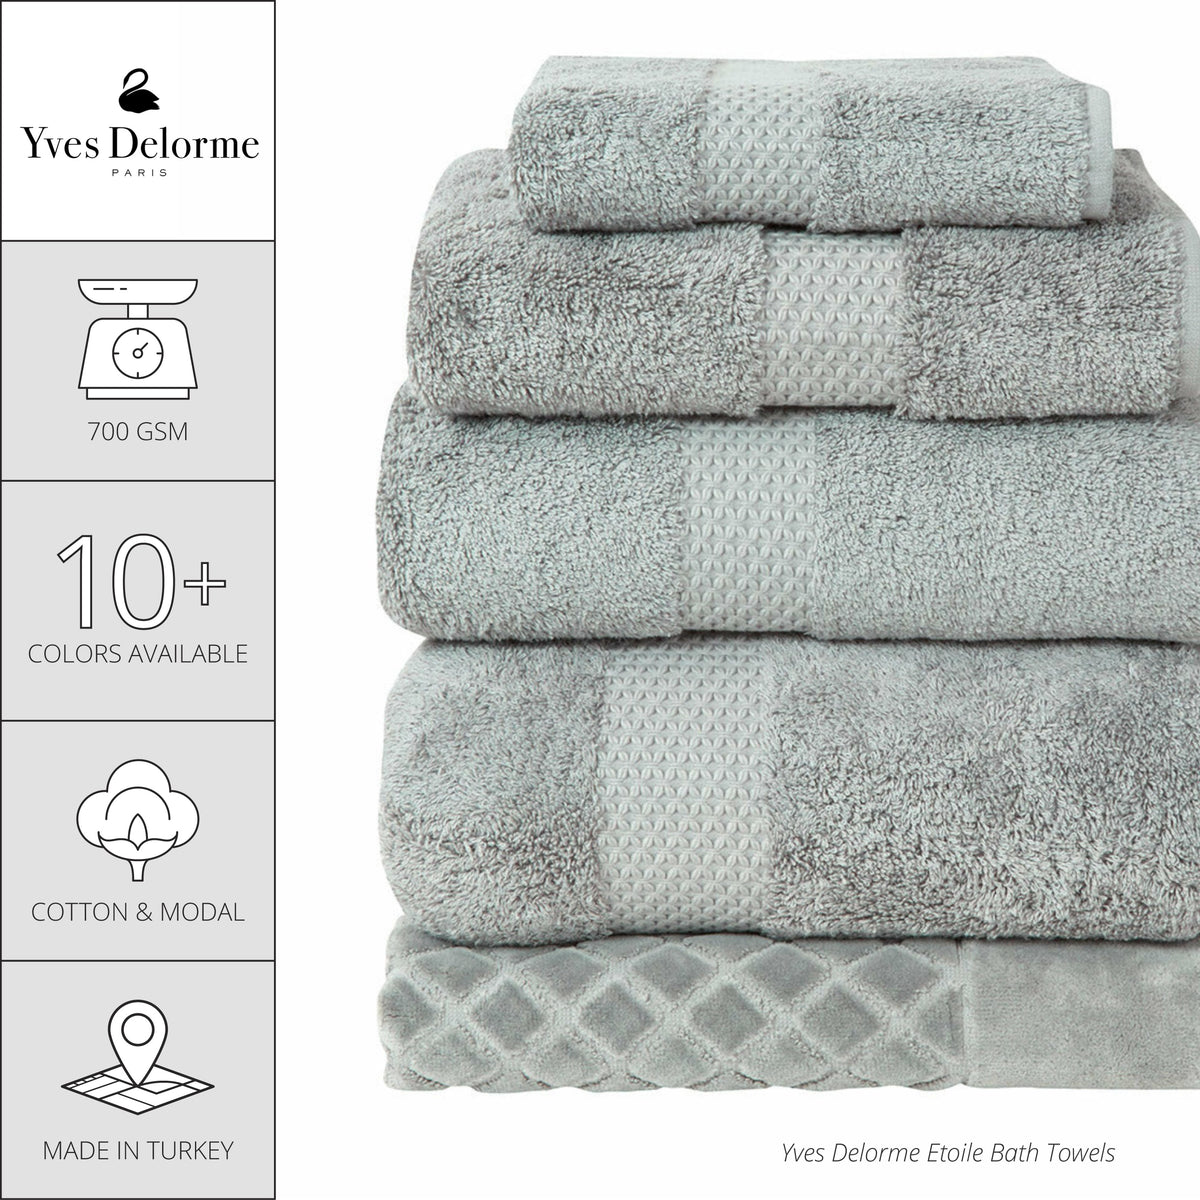 Yves Delorme Etoile Bath Towels and Mats - Blanc (White)